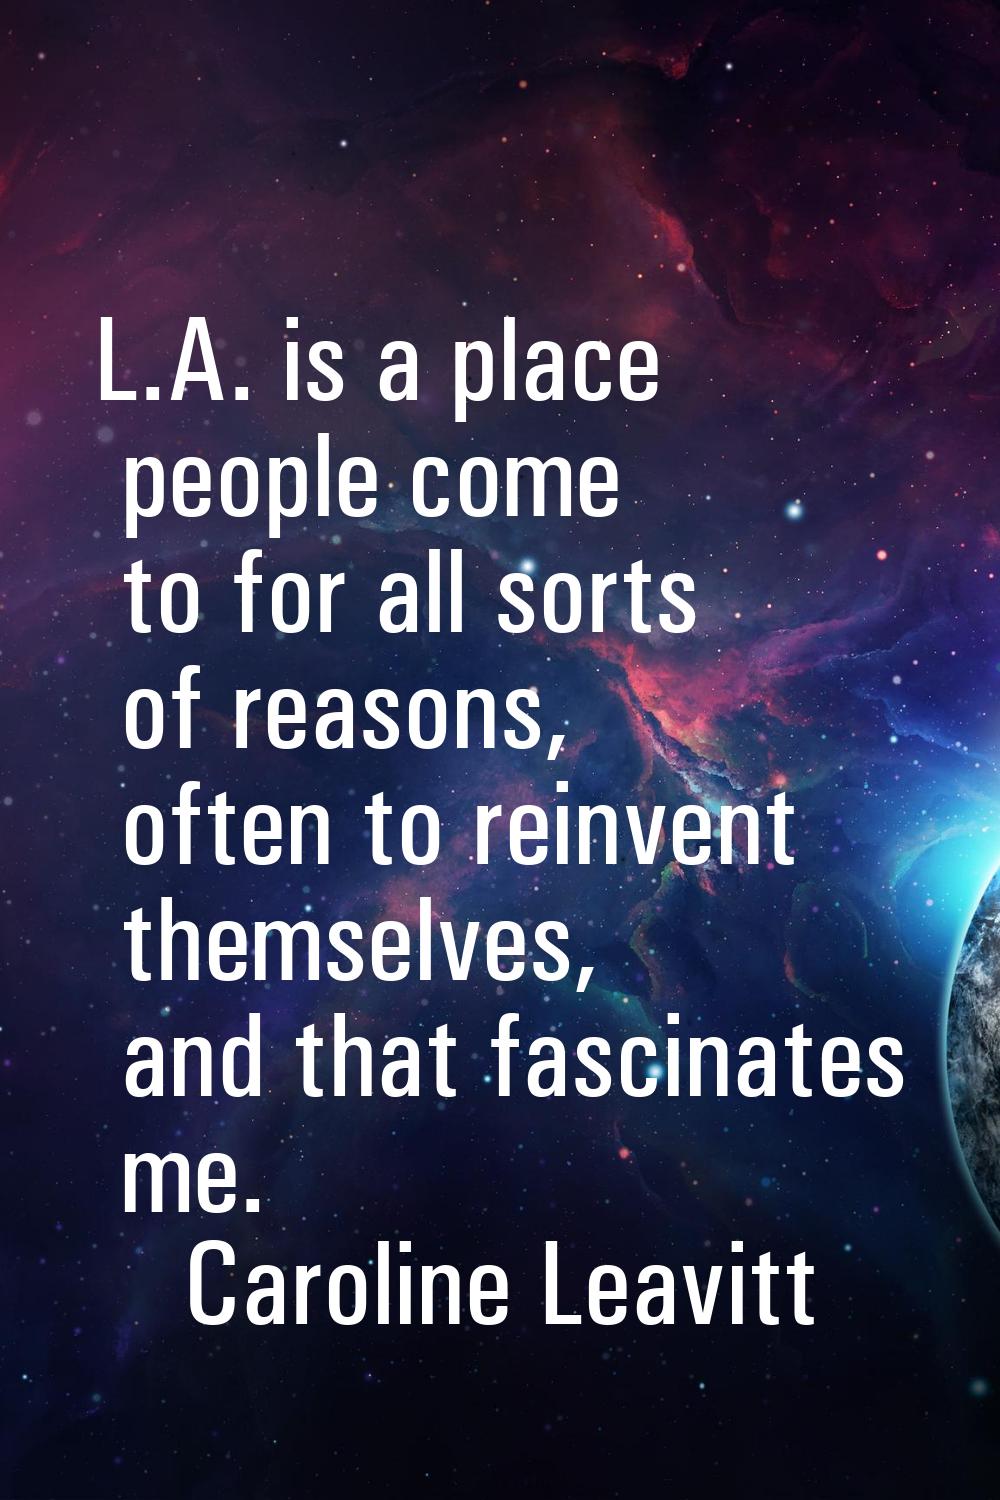 L.A. is a place people come to for all sorts of reasons, often to reinvent themselves, and that fas